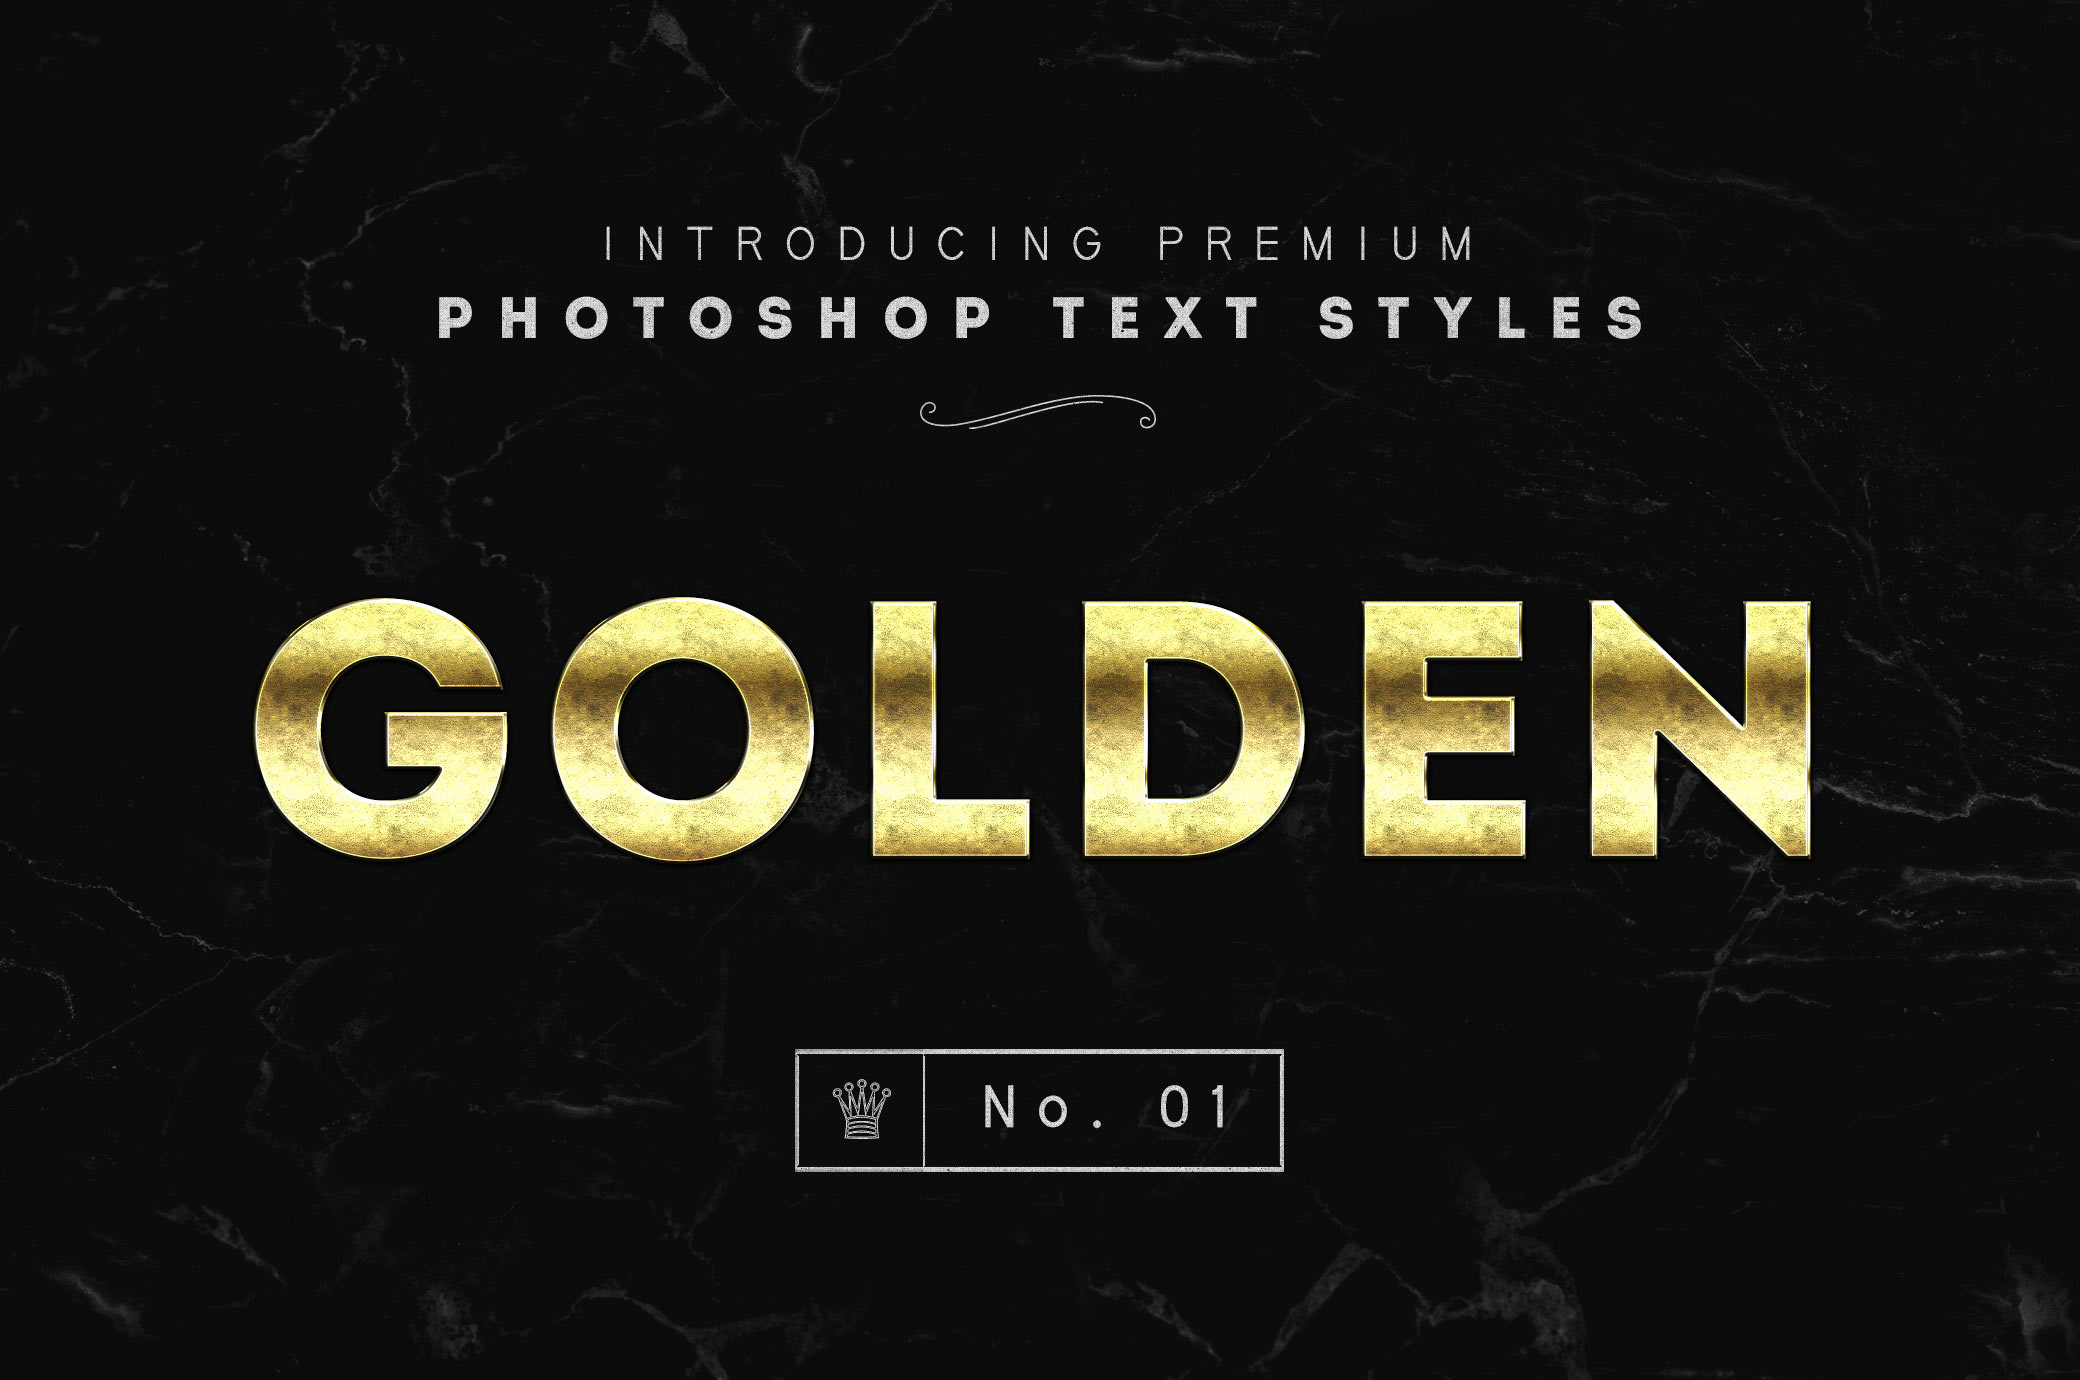 photoshop gold text styles free download